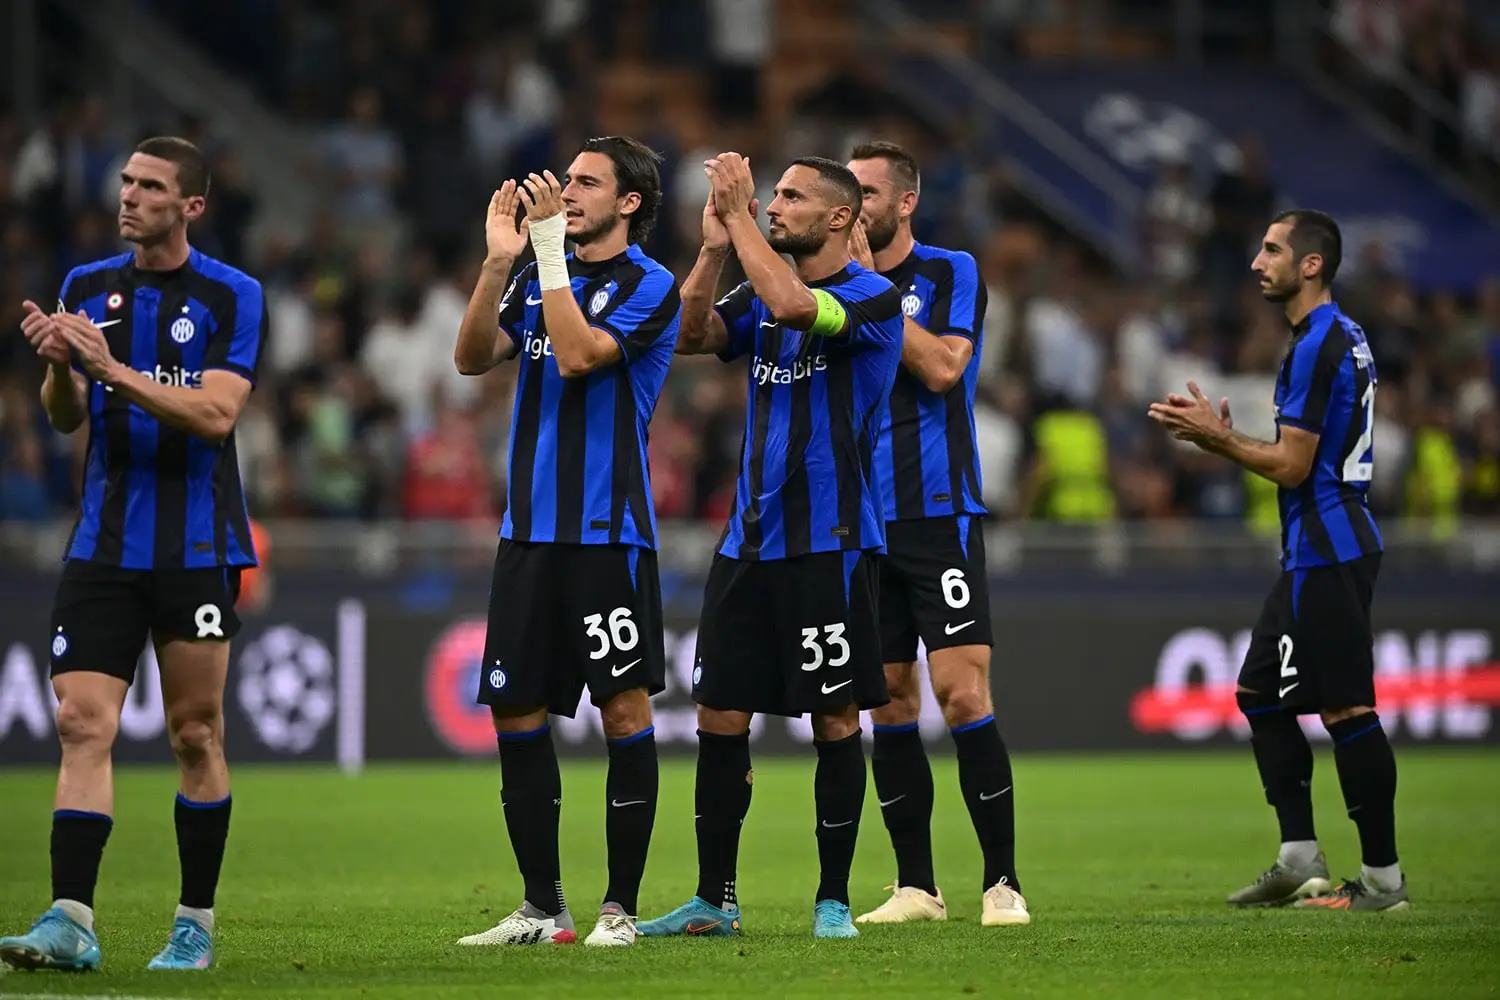 BBC Report: The Inter Milan striker could return from injury sooner than expected…